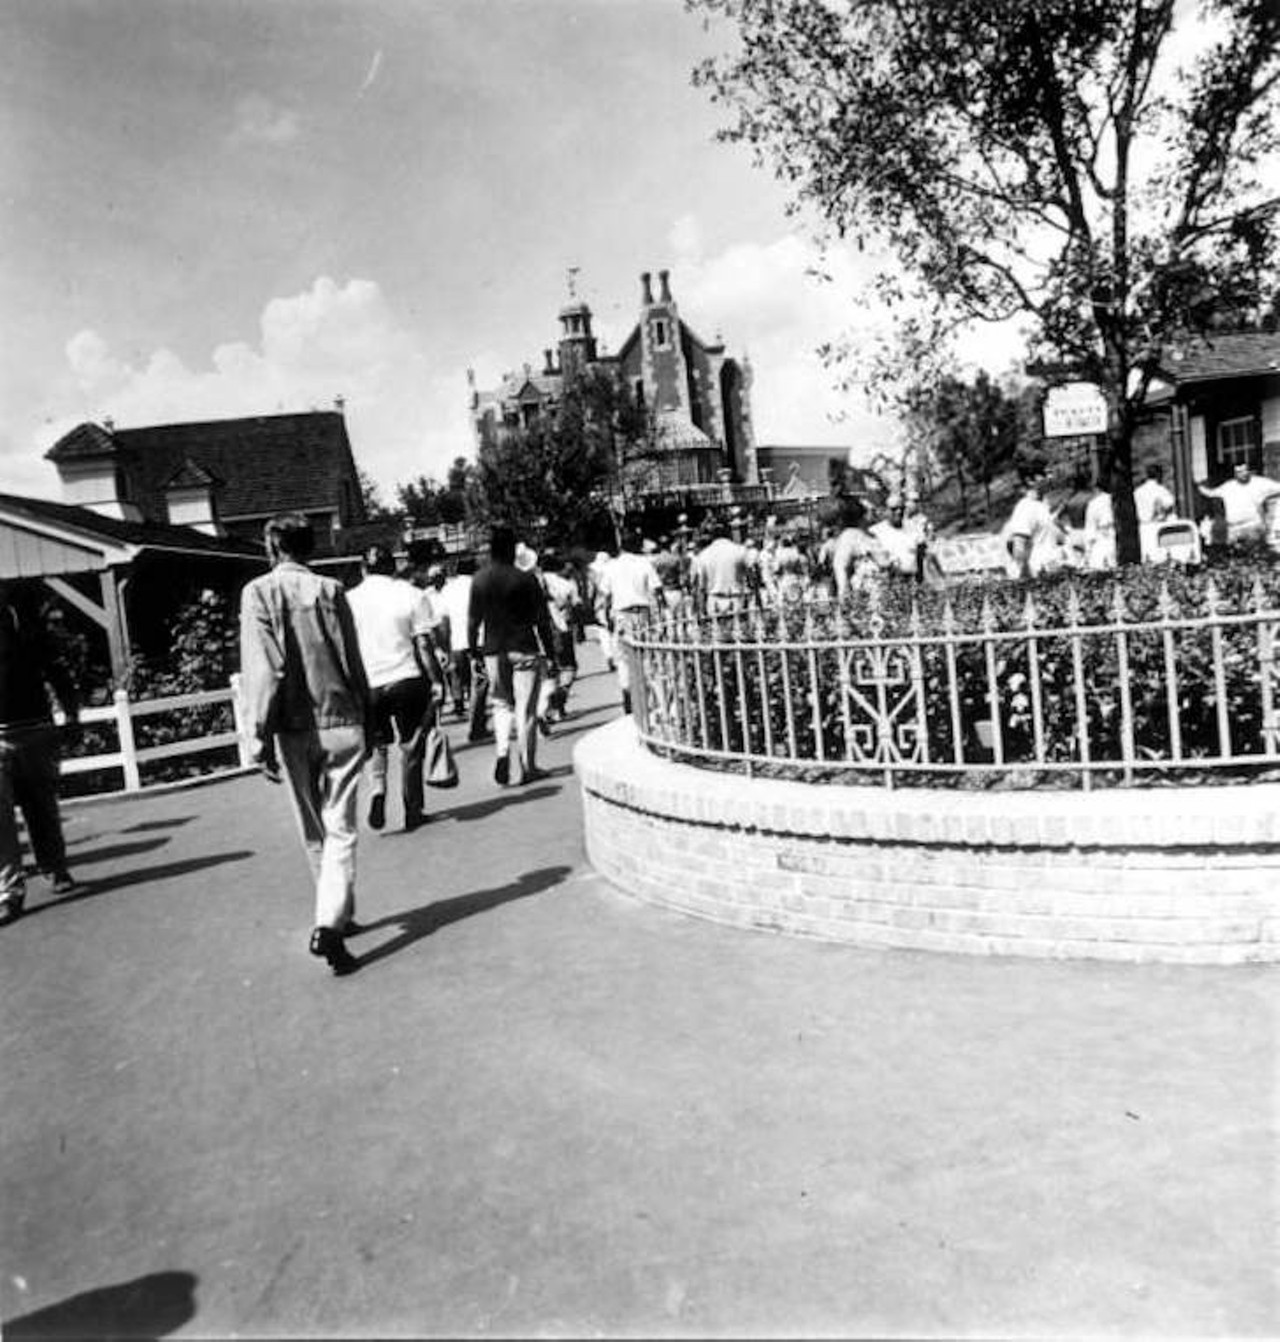 View of tourists at the Magic Kingdom (1971).